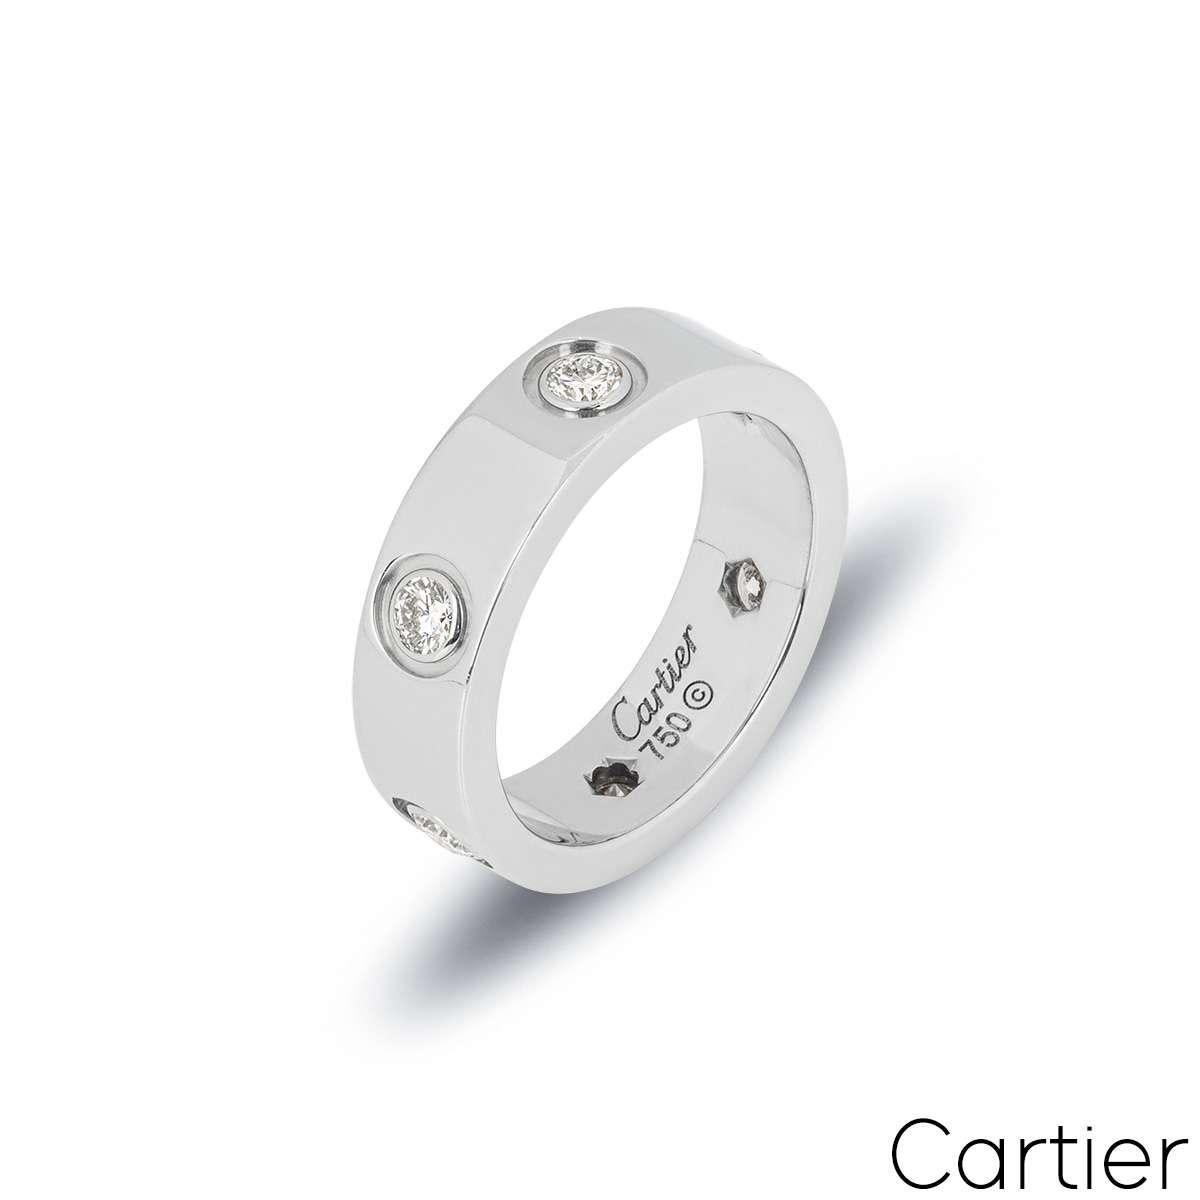 An iconic 18k white gold Cartier ring from the Love collection. The ring comprises of 6 round brilliant cut diamonds set throughout the centre of the band. Measuring 5.5mm in width, with a gross weight of 8.57 grams, this ring is a size UK N½ - EU